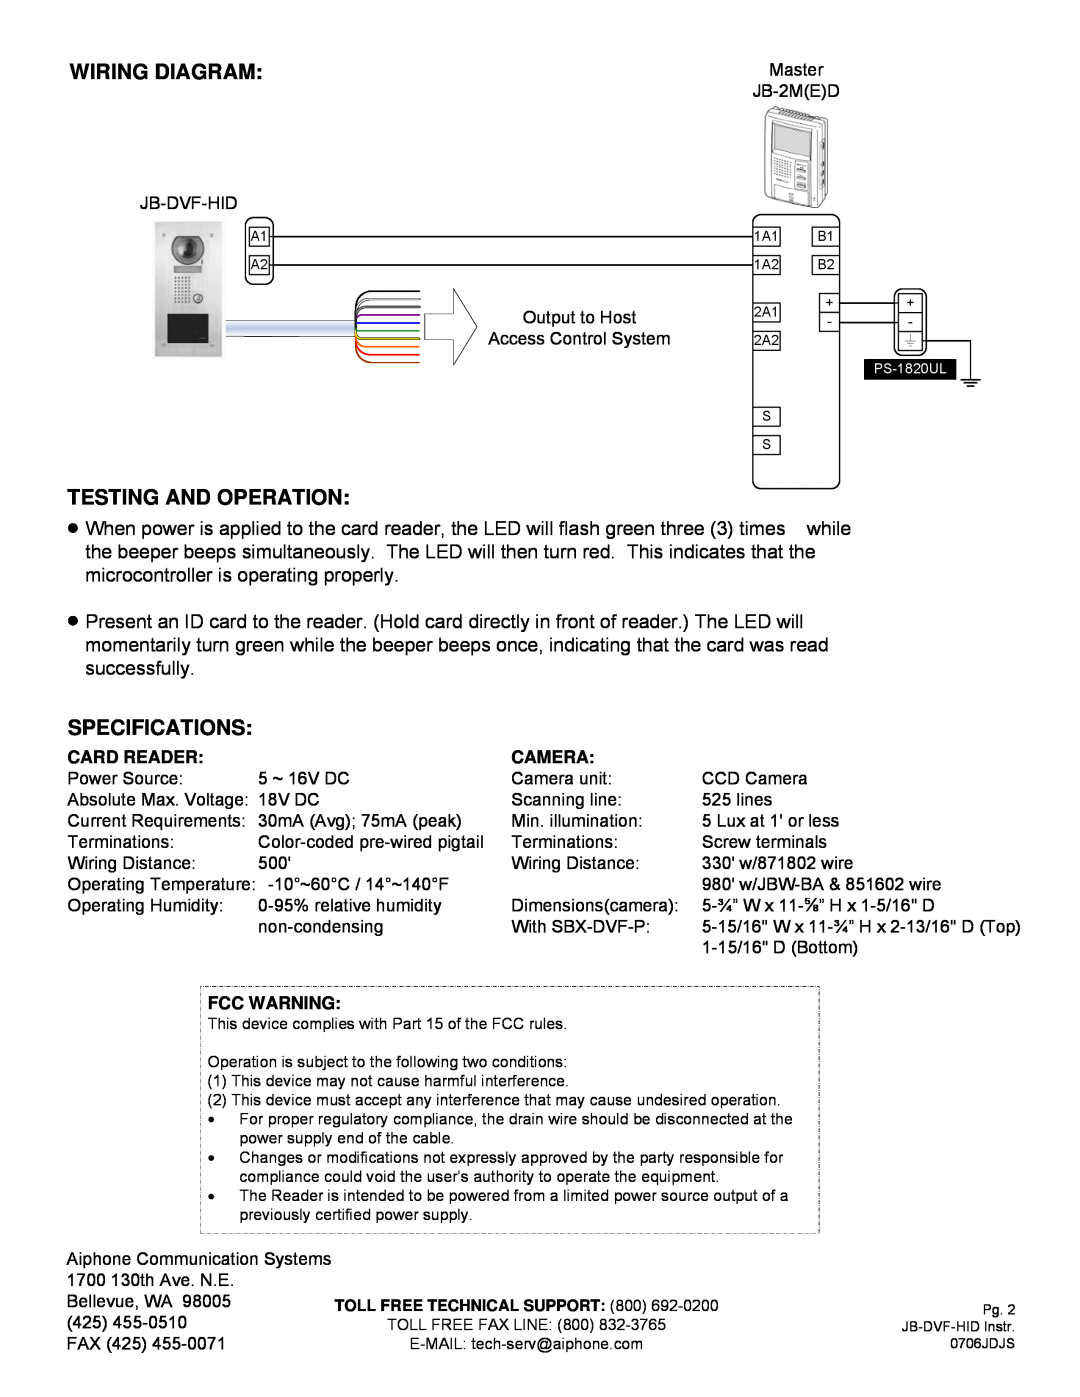 Aiphone JB-DVF-HID dimensions Wiring Diagram, Testing And Operation, Specifications, Card Reader, Camera, Fcc Warning 